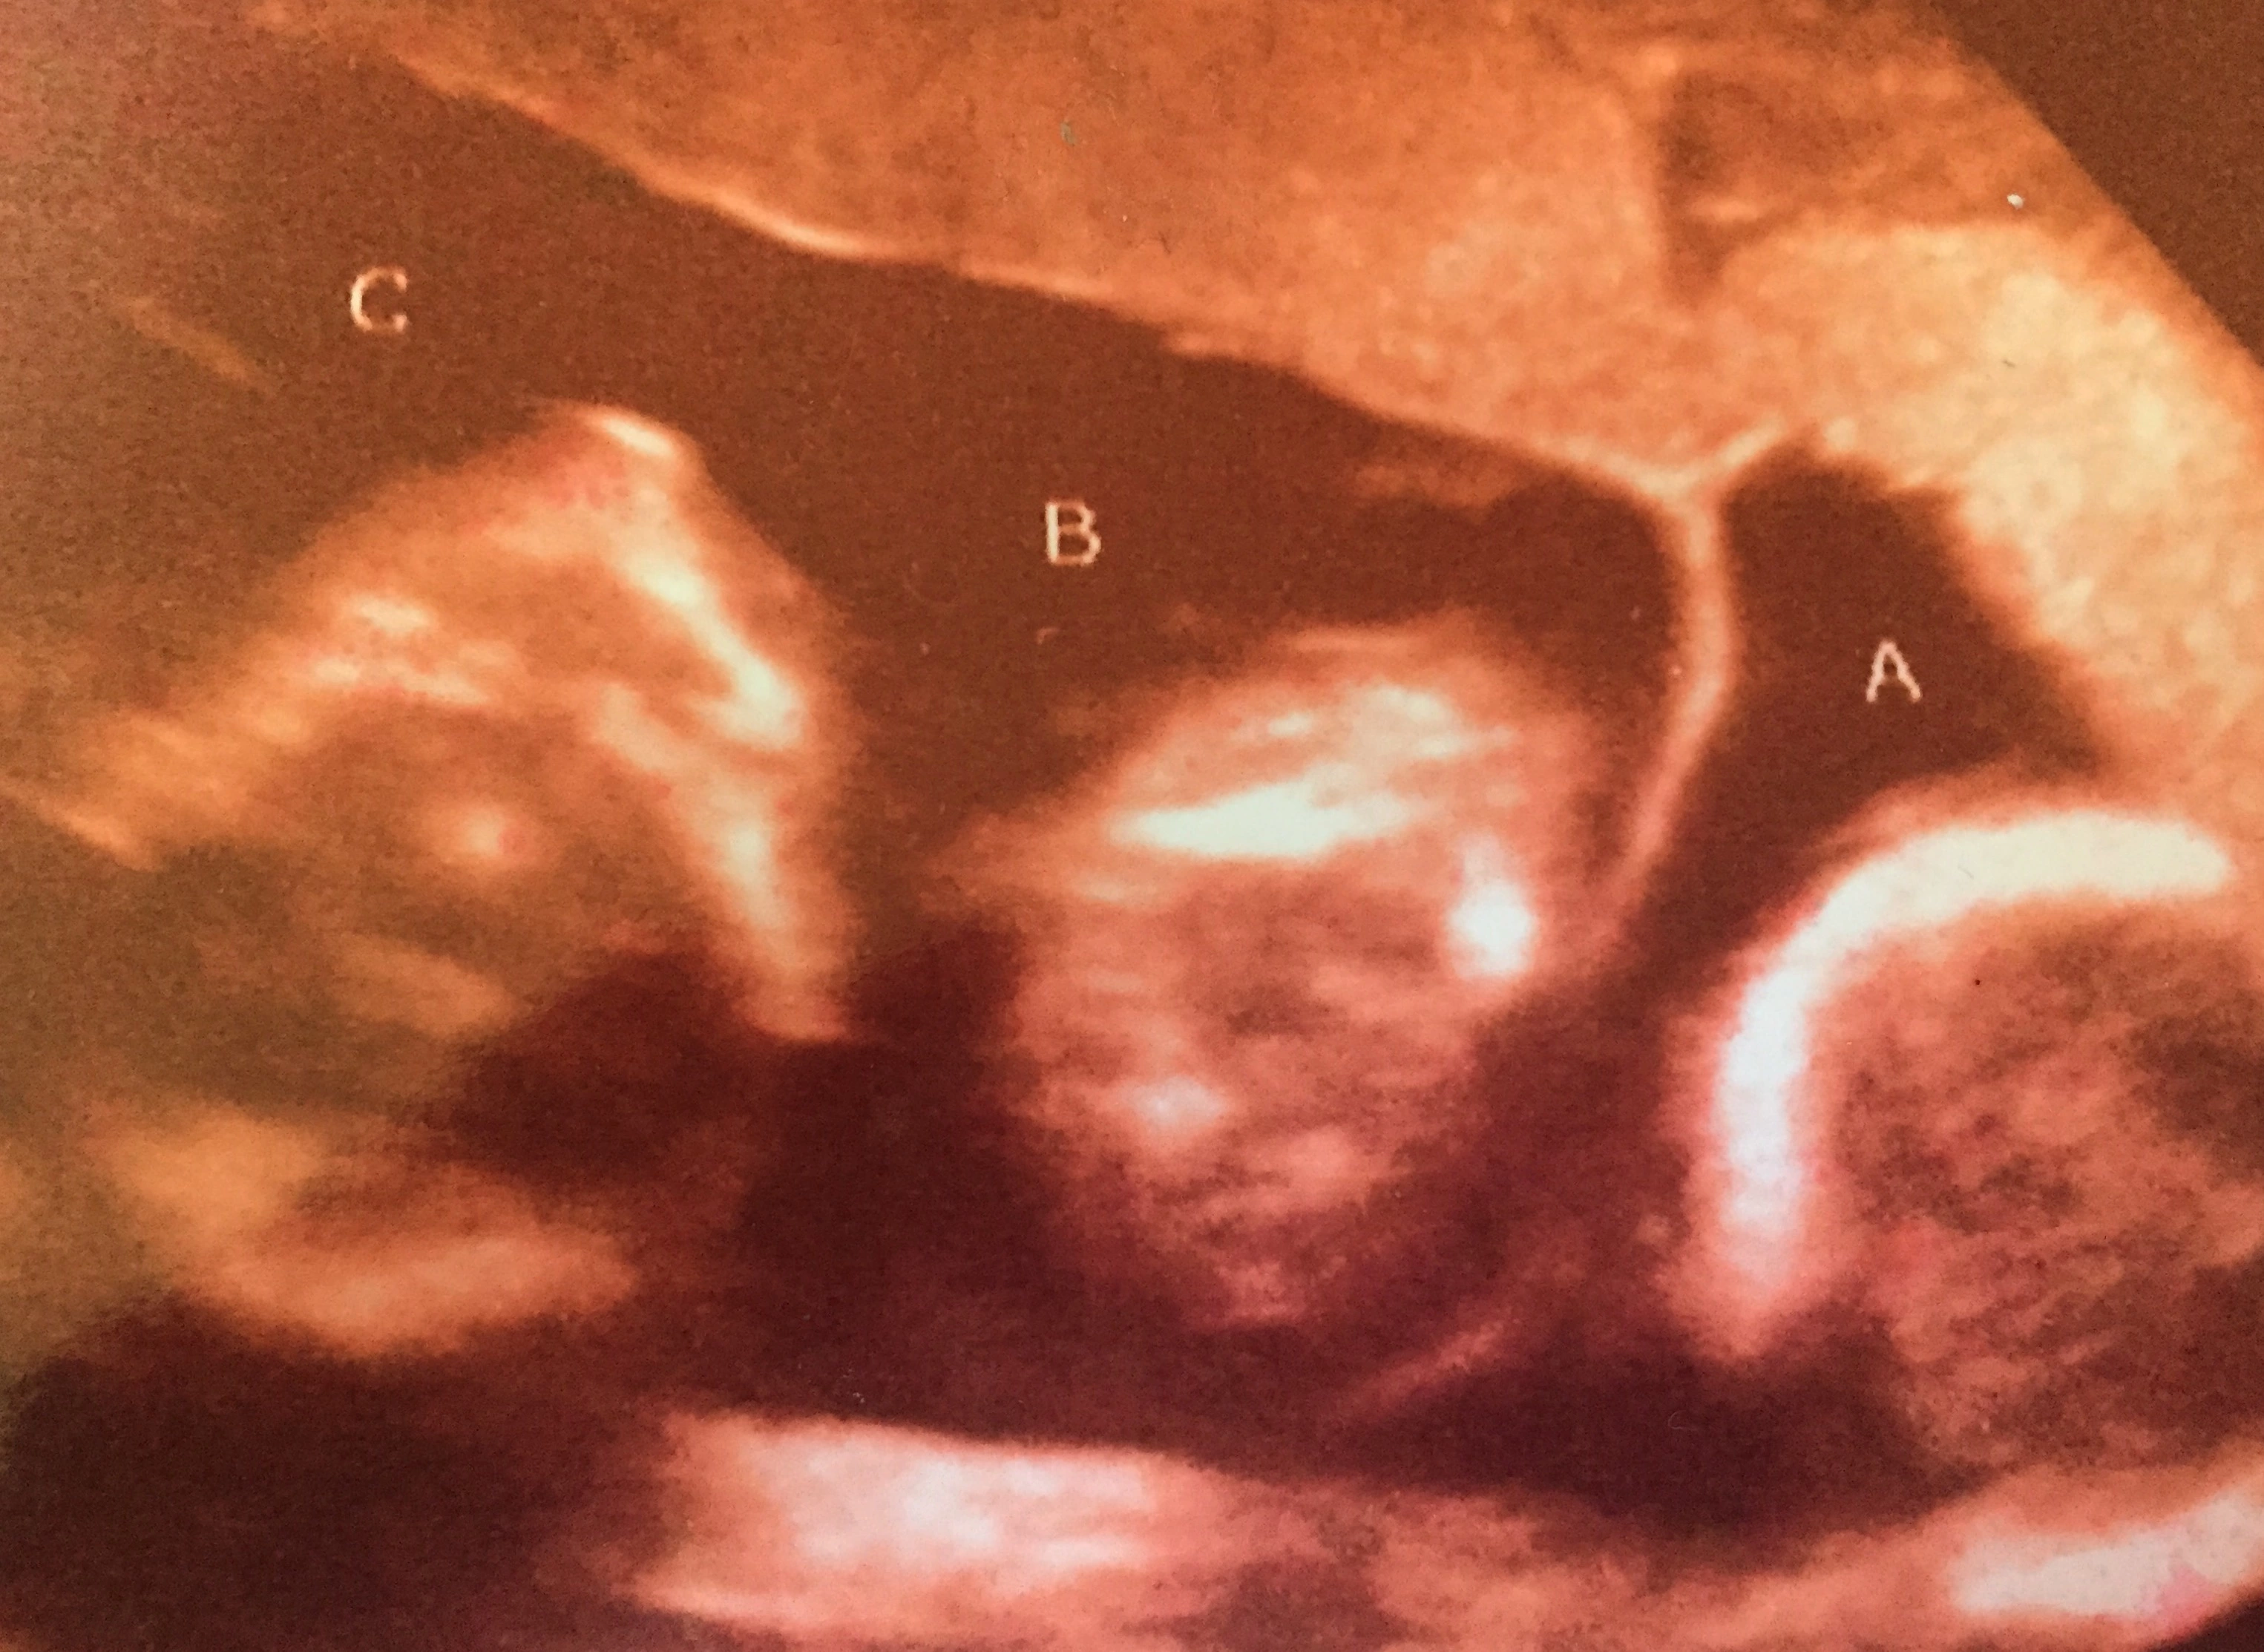 Triplets sonogram showing the two amniotic sacs